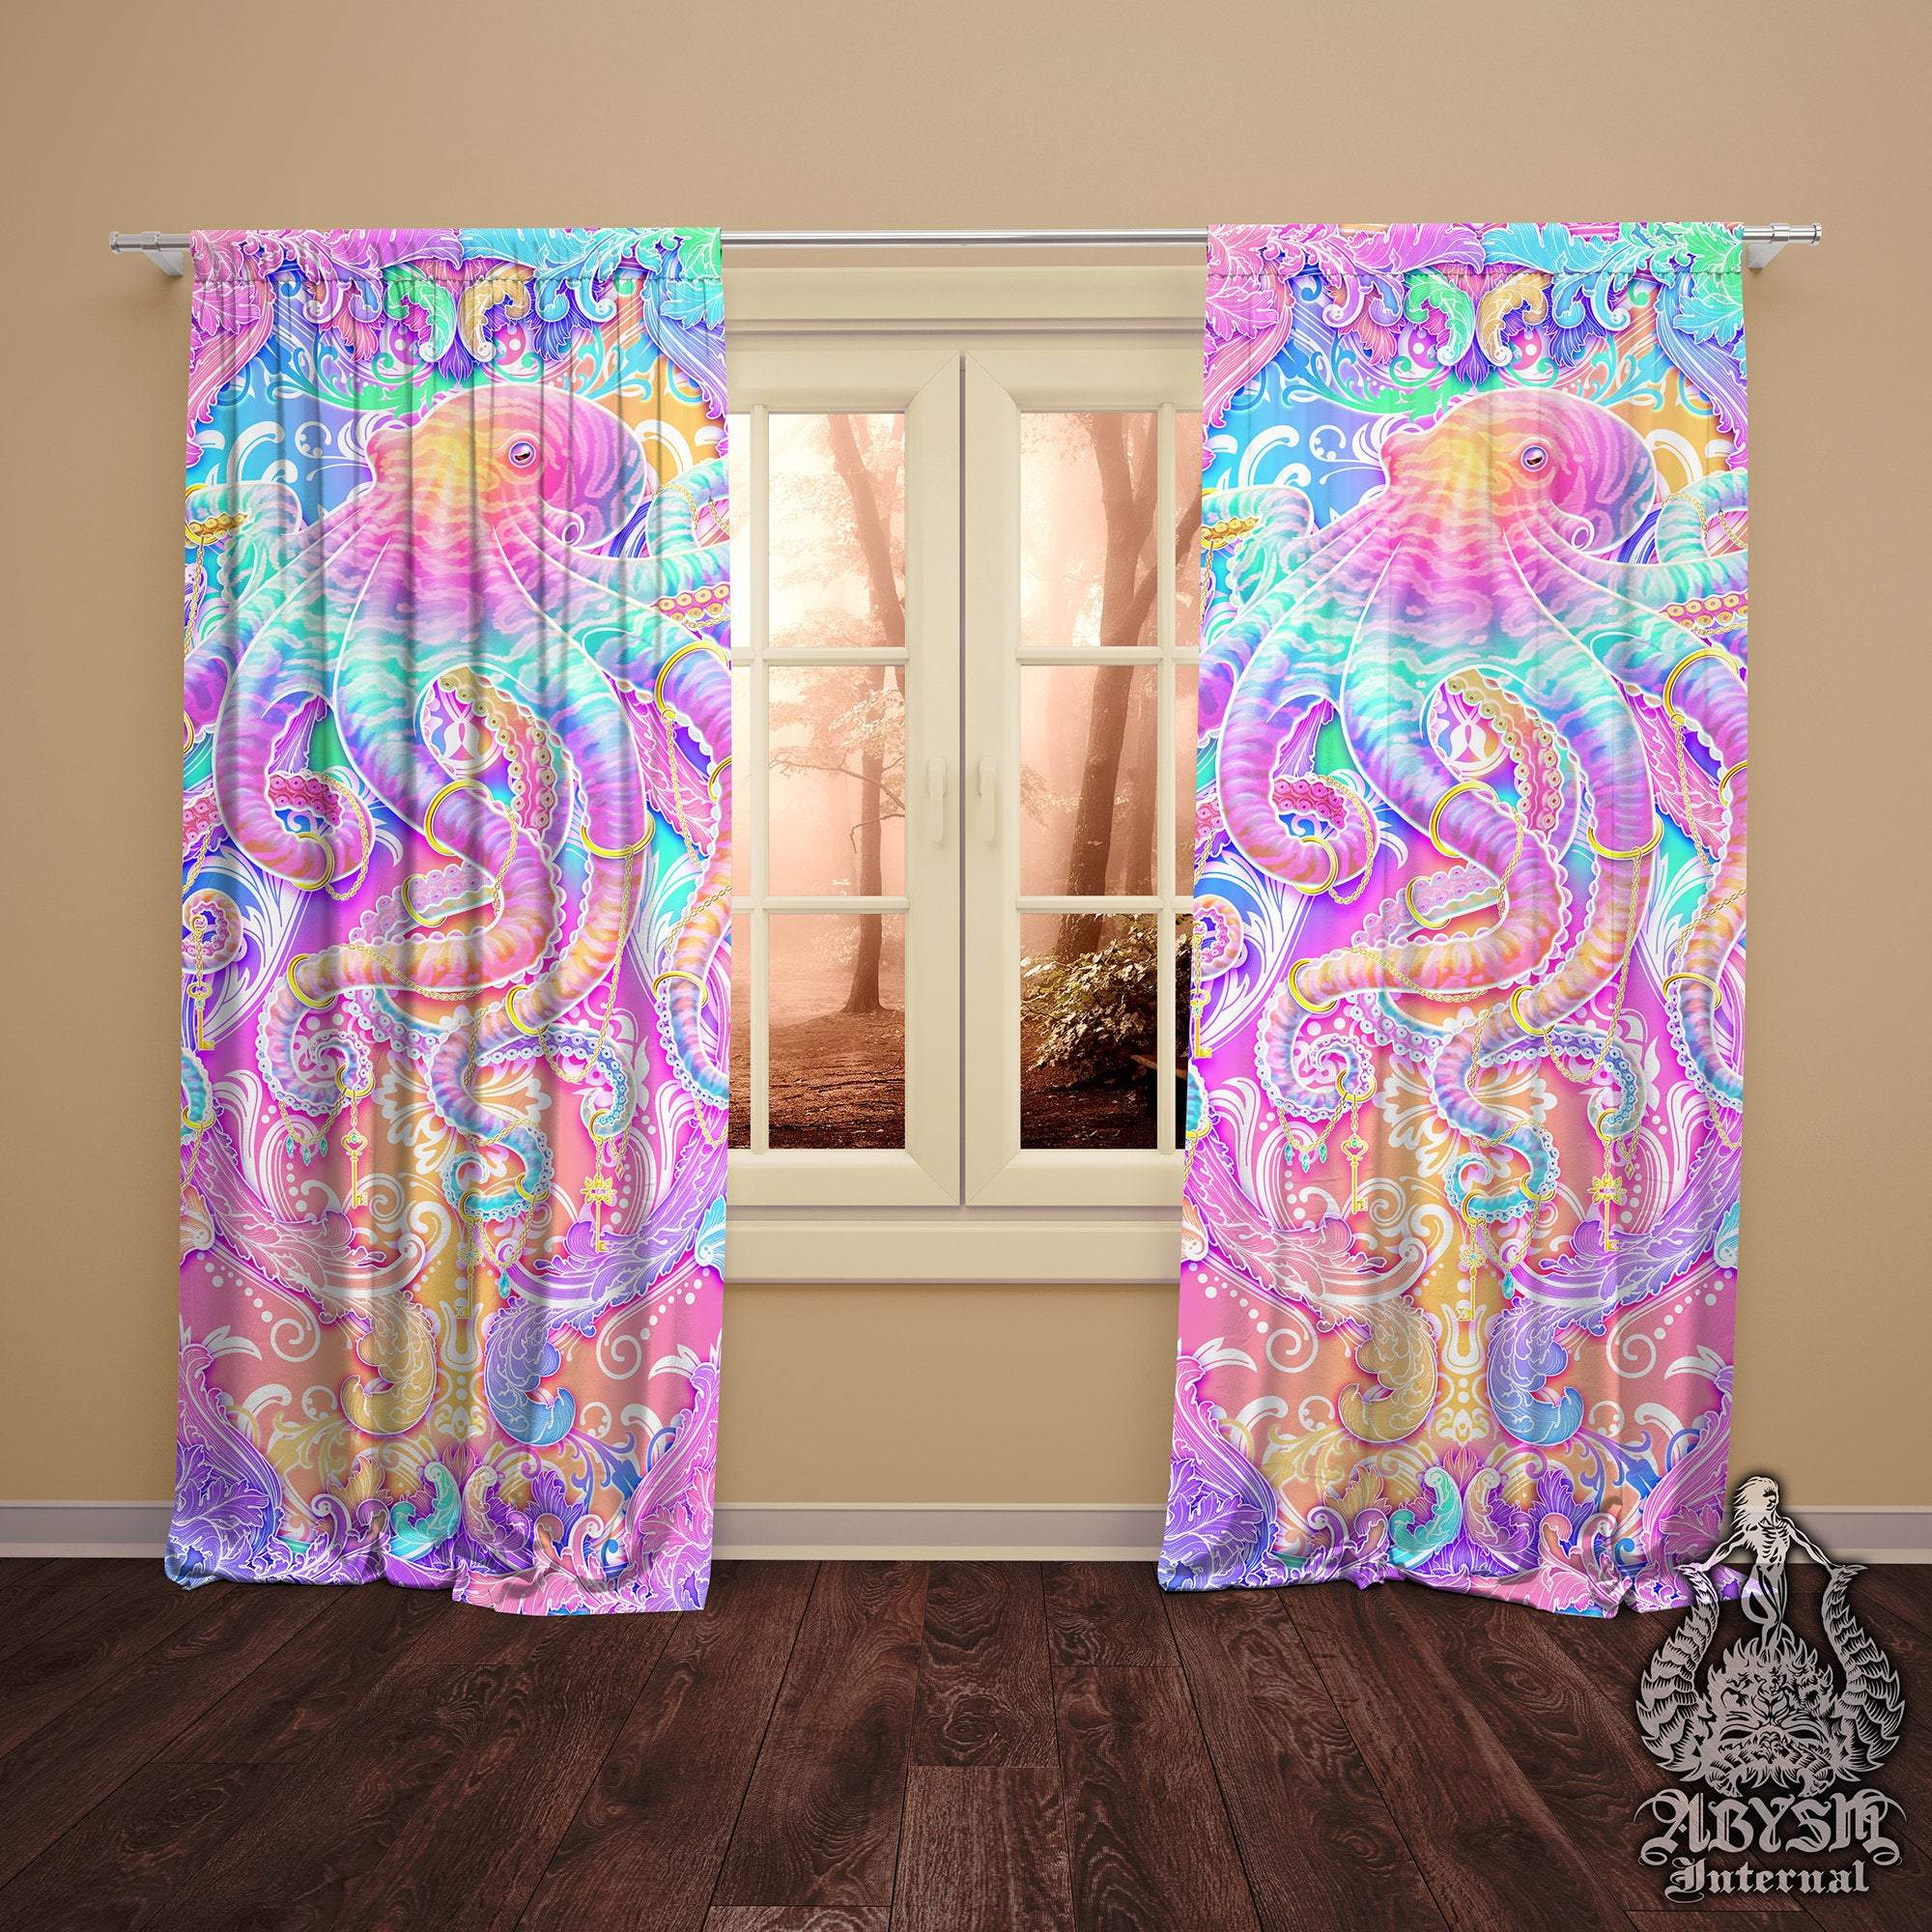 Kawaii Blackout Curtains, Long Window Panels, Psychedelic Art Print, Yume Kawaii, Holographic and Aesthetic Room Decor, Fairy Kei, Funky and Eclectic Home Decor - Pastel Octopus - Abysm Internal